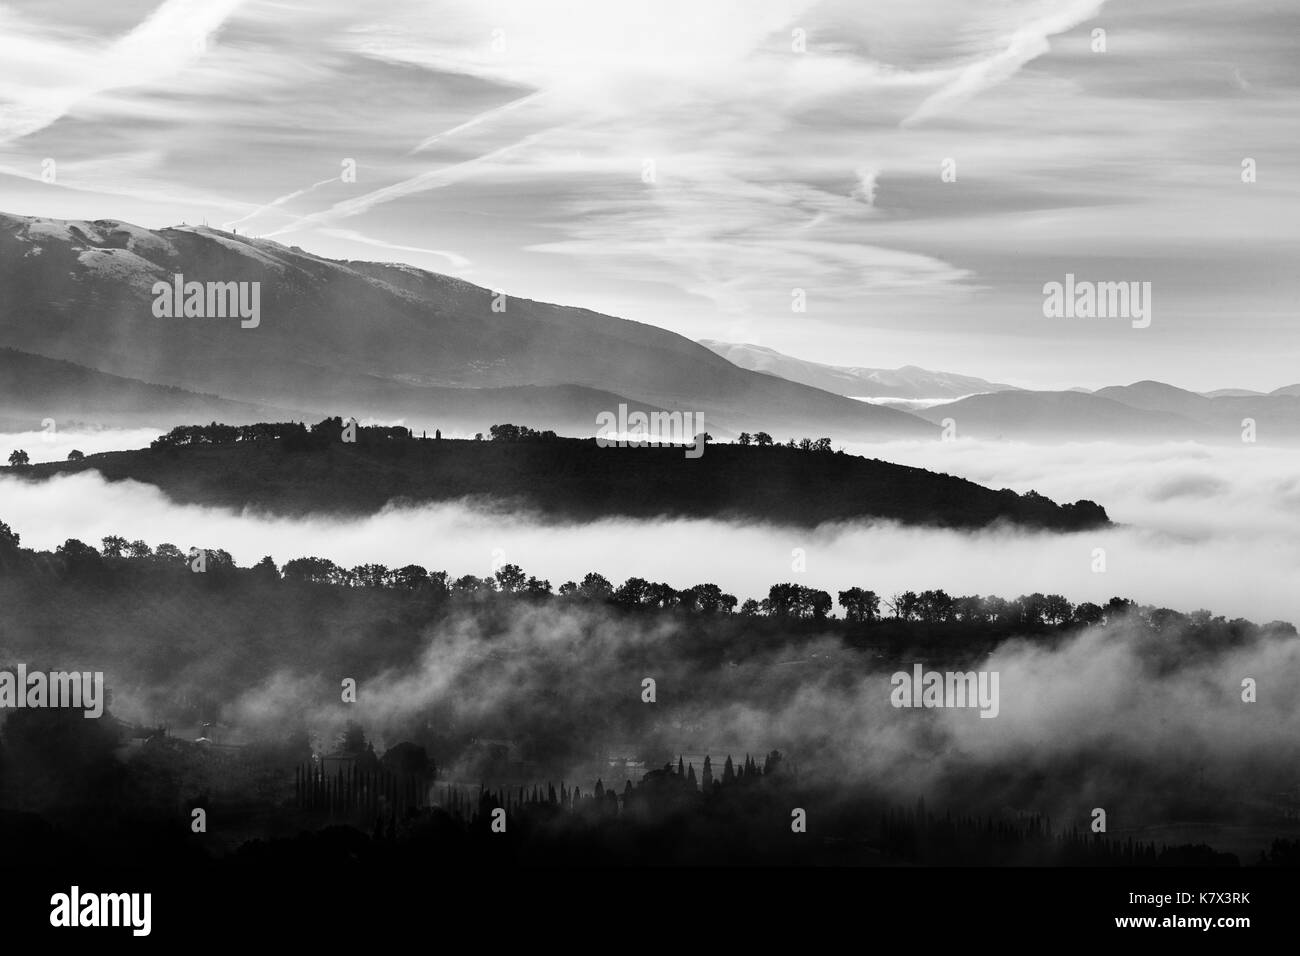 Valley filled by fog with hills and tree emerging from the mist Stock Photo